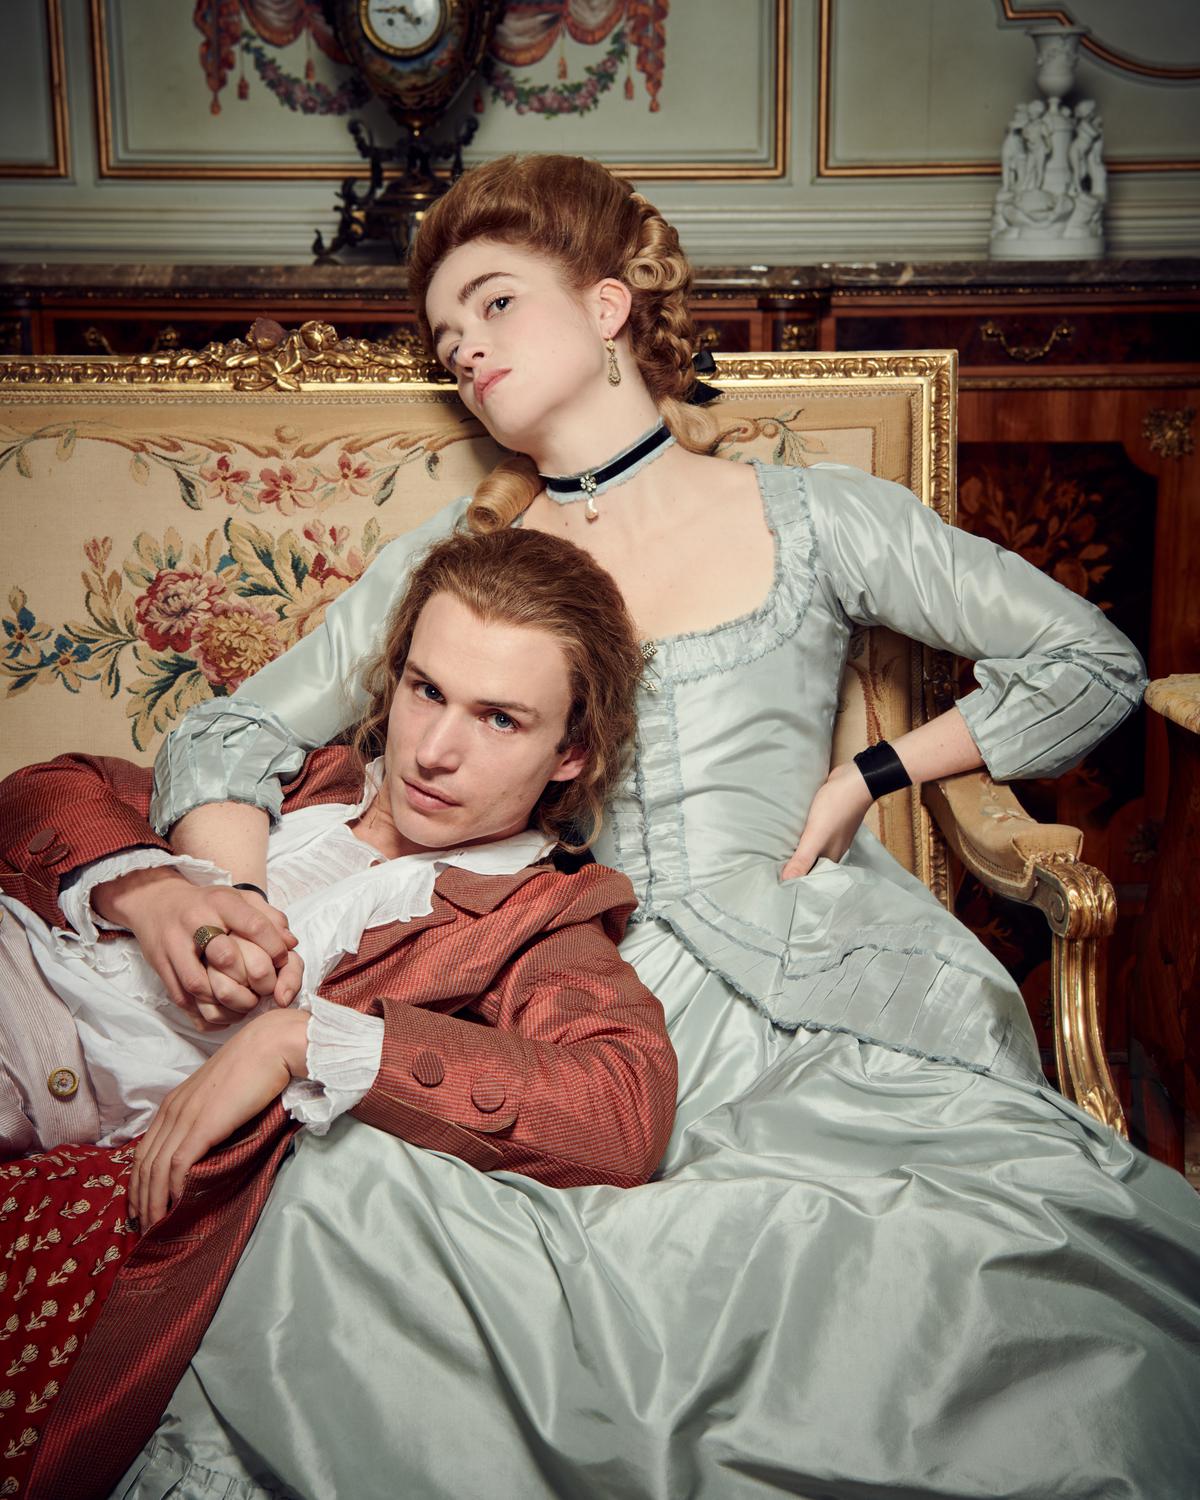 Nicholas Denton as Pascal Valmont and Alice Englert as Camille in Dangerous Liaisons